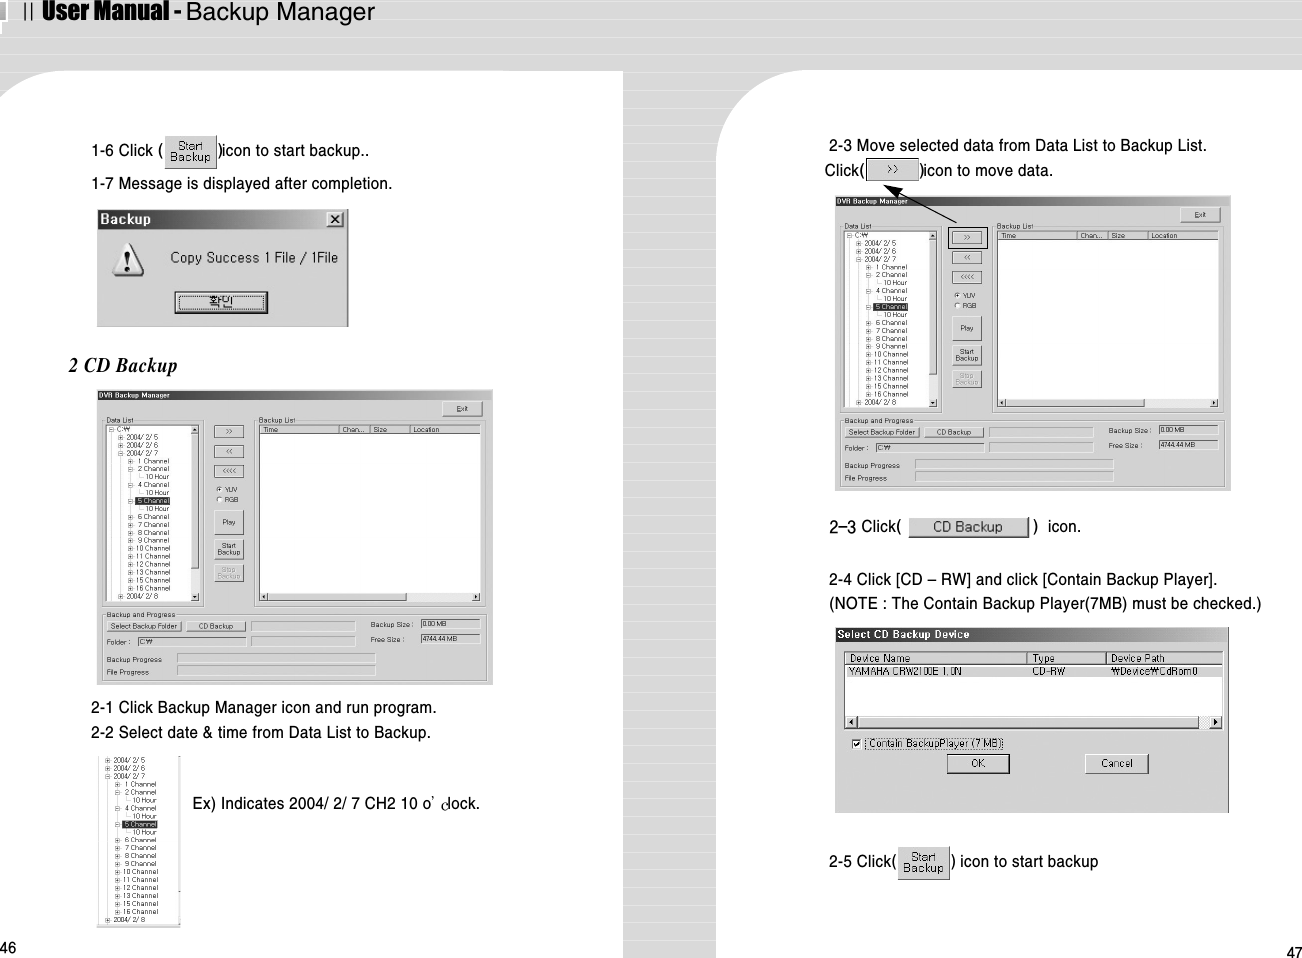 ⅡUser Manual - Backup Manager46 471-6 Click ()icon to start backup..1-7 Message is displayed after completion.2 CD Backup2-1 Click Backup Manager icon and run program.2-2 Select date &amp; time from Data List to Backup.2-3 Move selected data from Data List to Backup List.Click()icon to move data.Ex) Indicates 2004/ 2/ 7 CH2 10 o lock.2-3 Click() icon.2-4 Click [CD – RW] and click [Contain Backup Player].(NOTE : The Contain Backup Player(7MB) must be checked.) 2-5 Click() icon to start backup